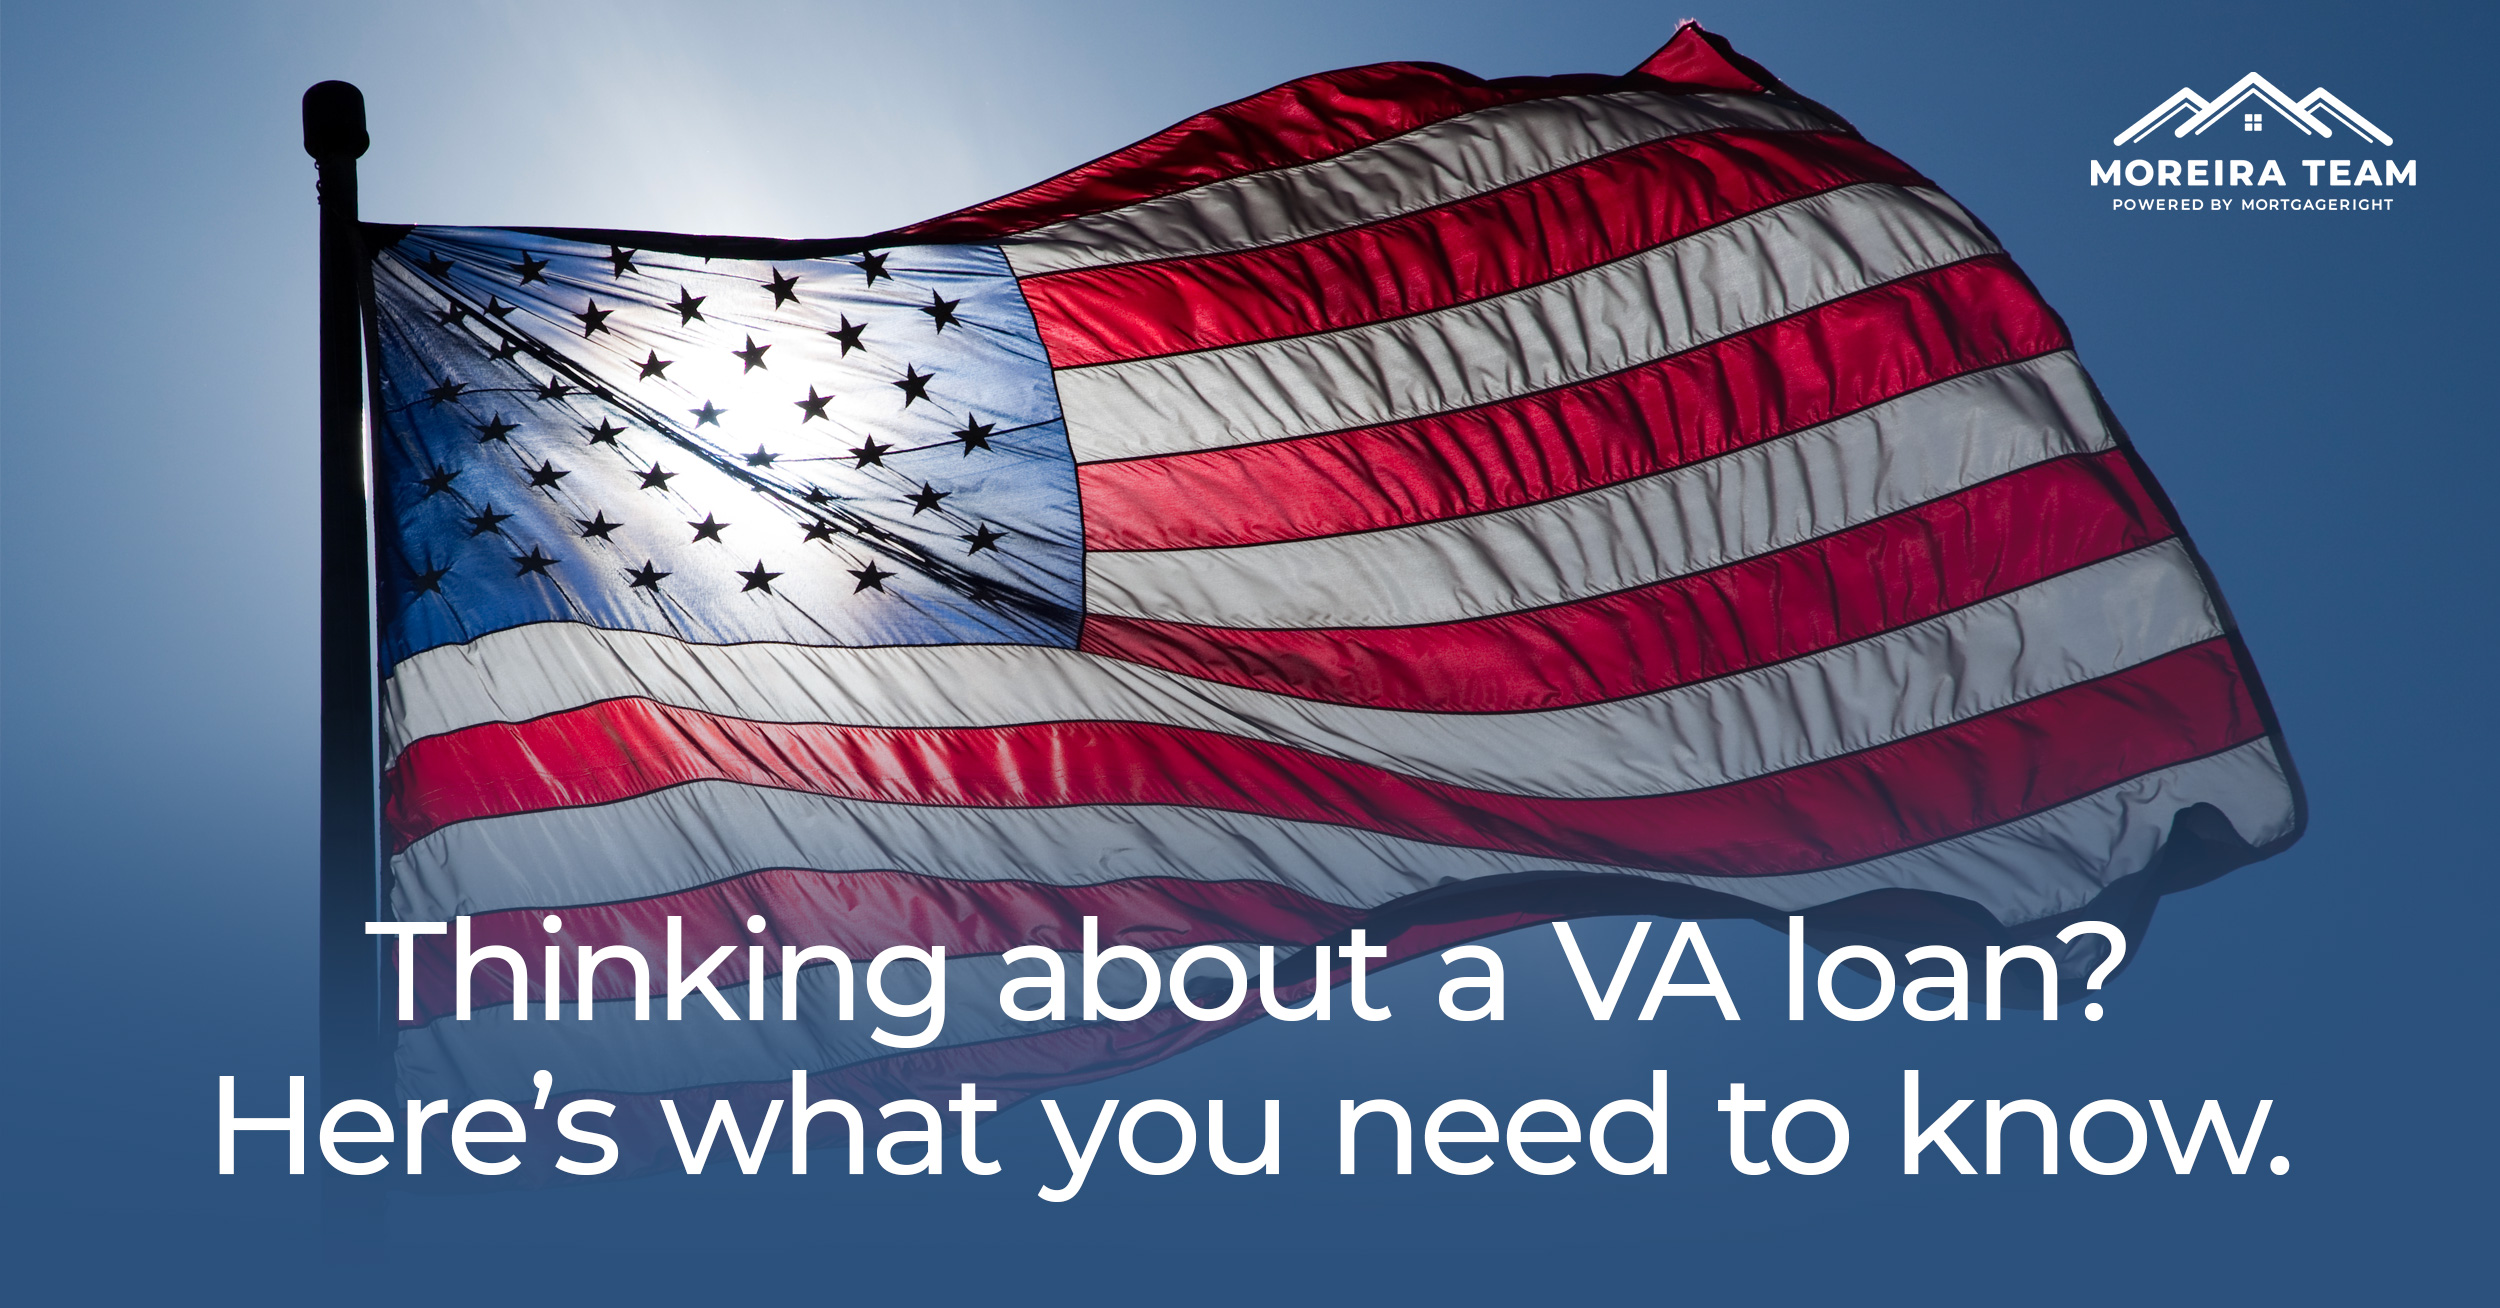 What you need to know about a VA loan